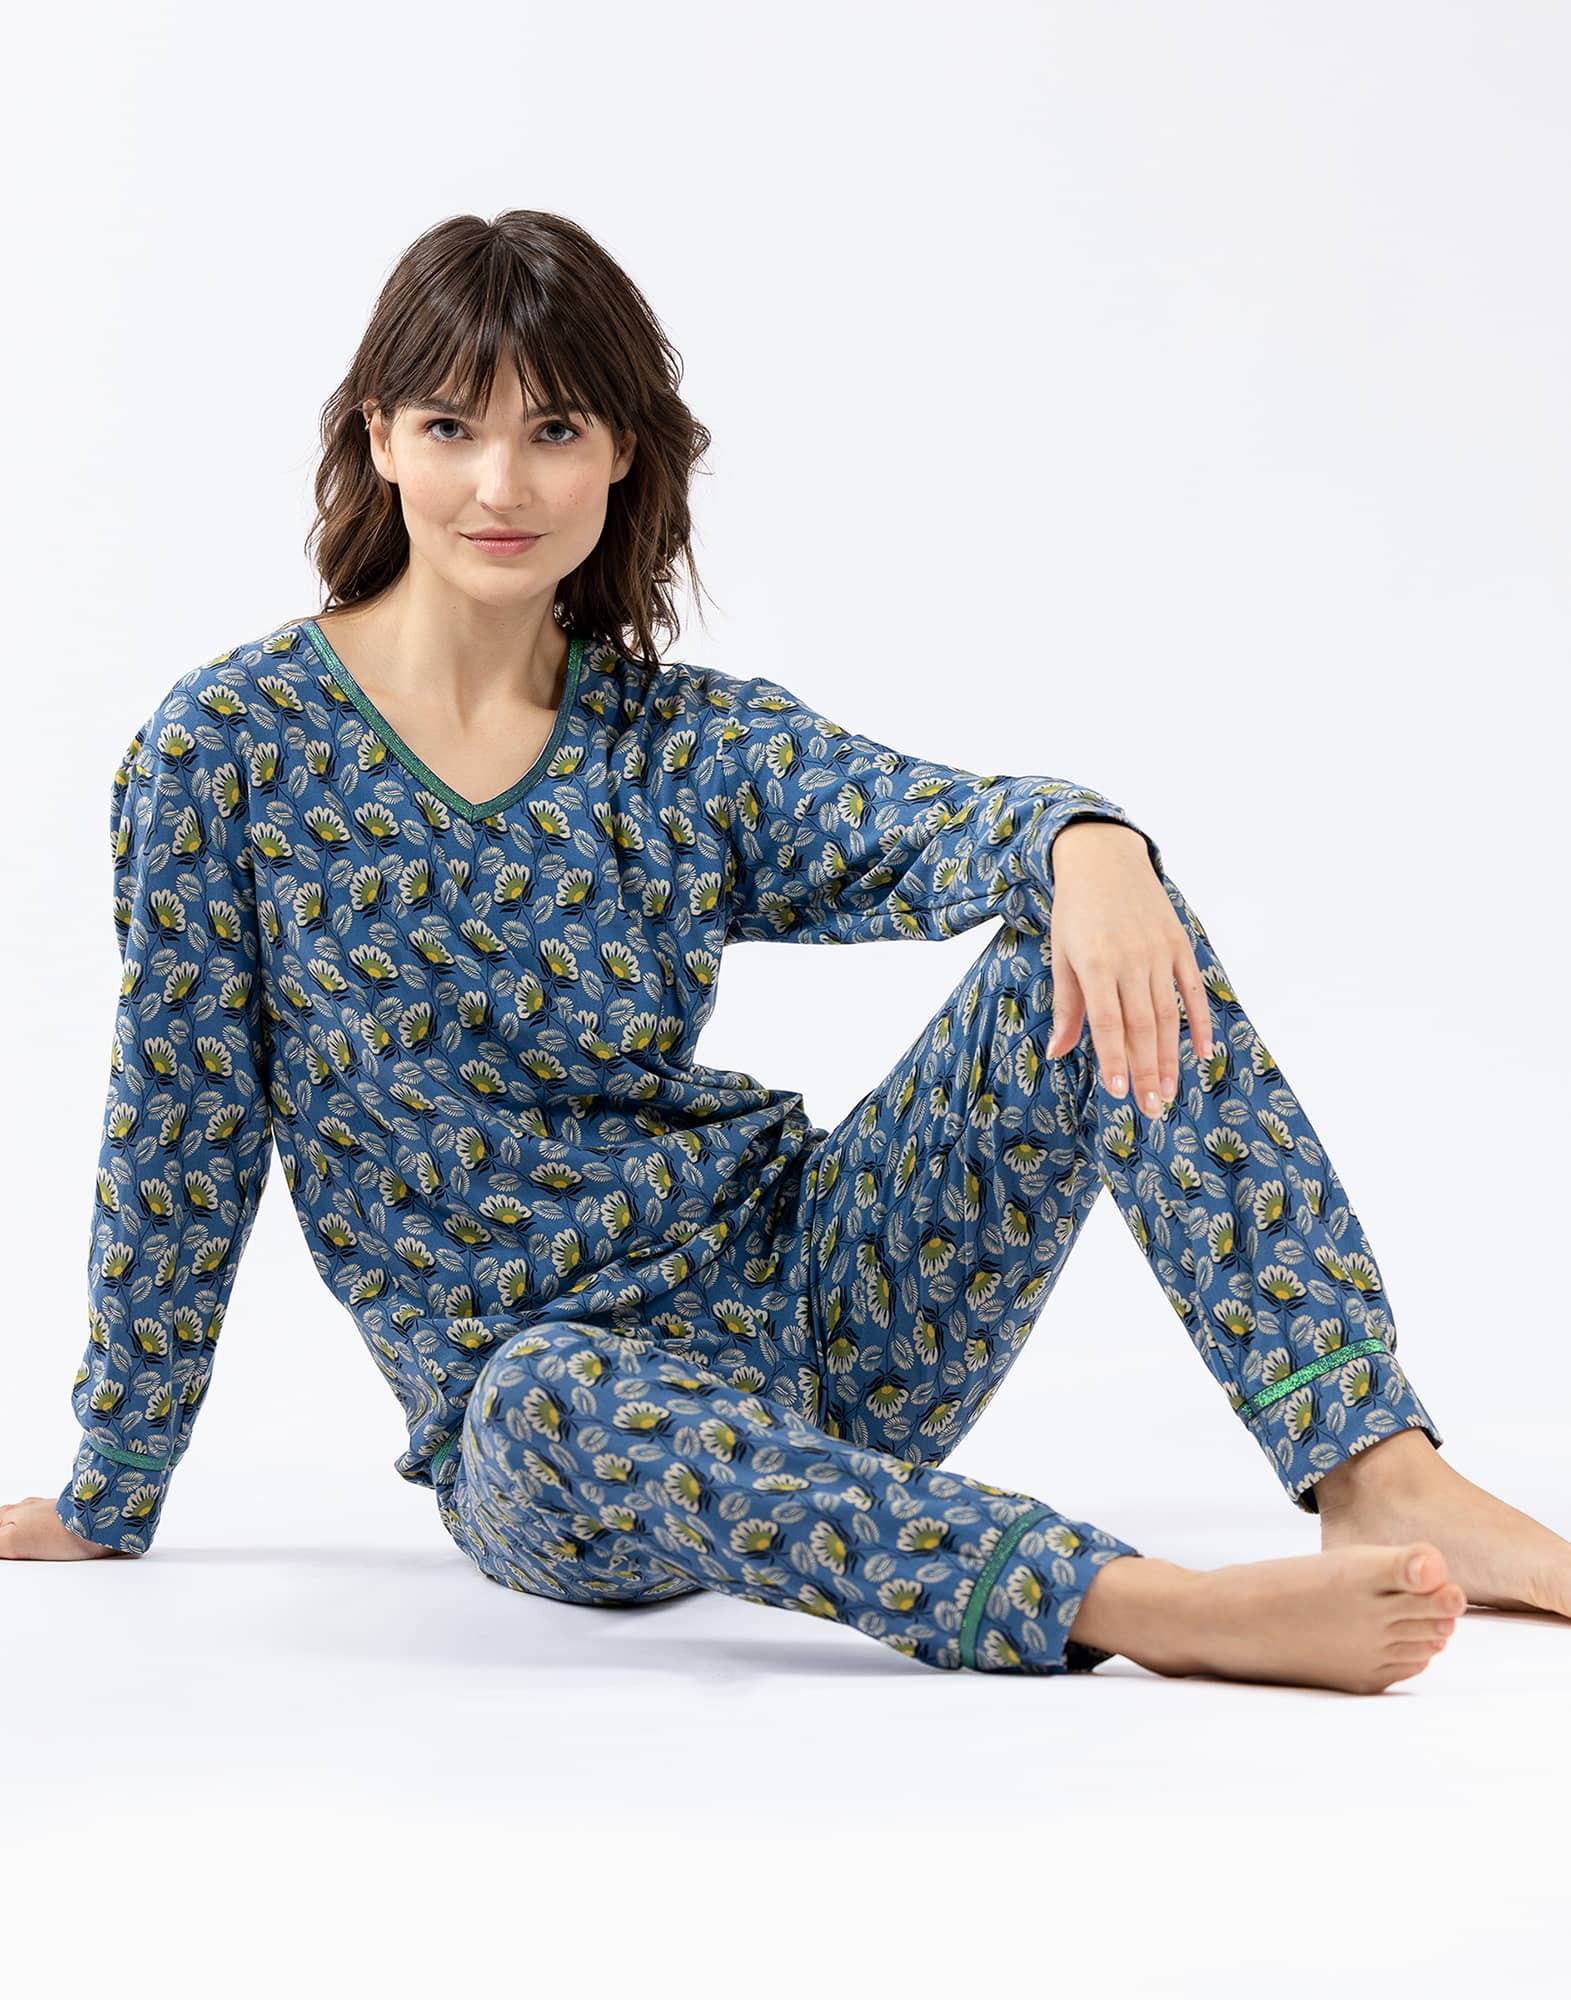 Knit Pajama with celtic print and plain trousers.